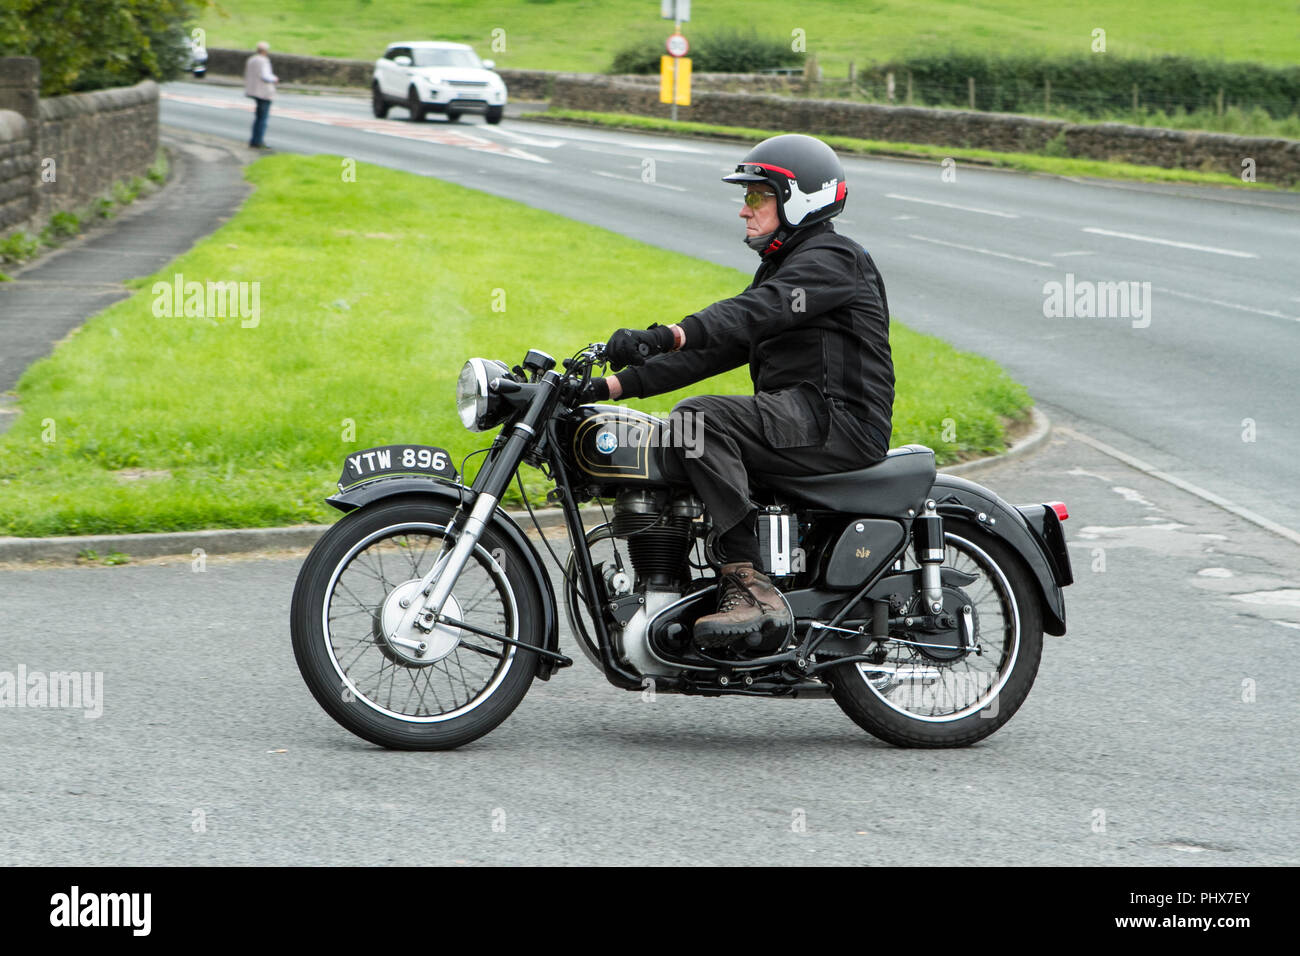 1854 Ajs motorcycle at Hoghton towers annual classic vintage car rally, UK Stock Photo